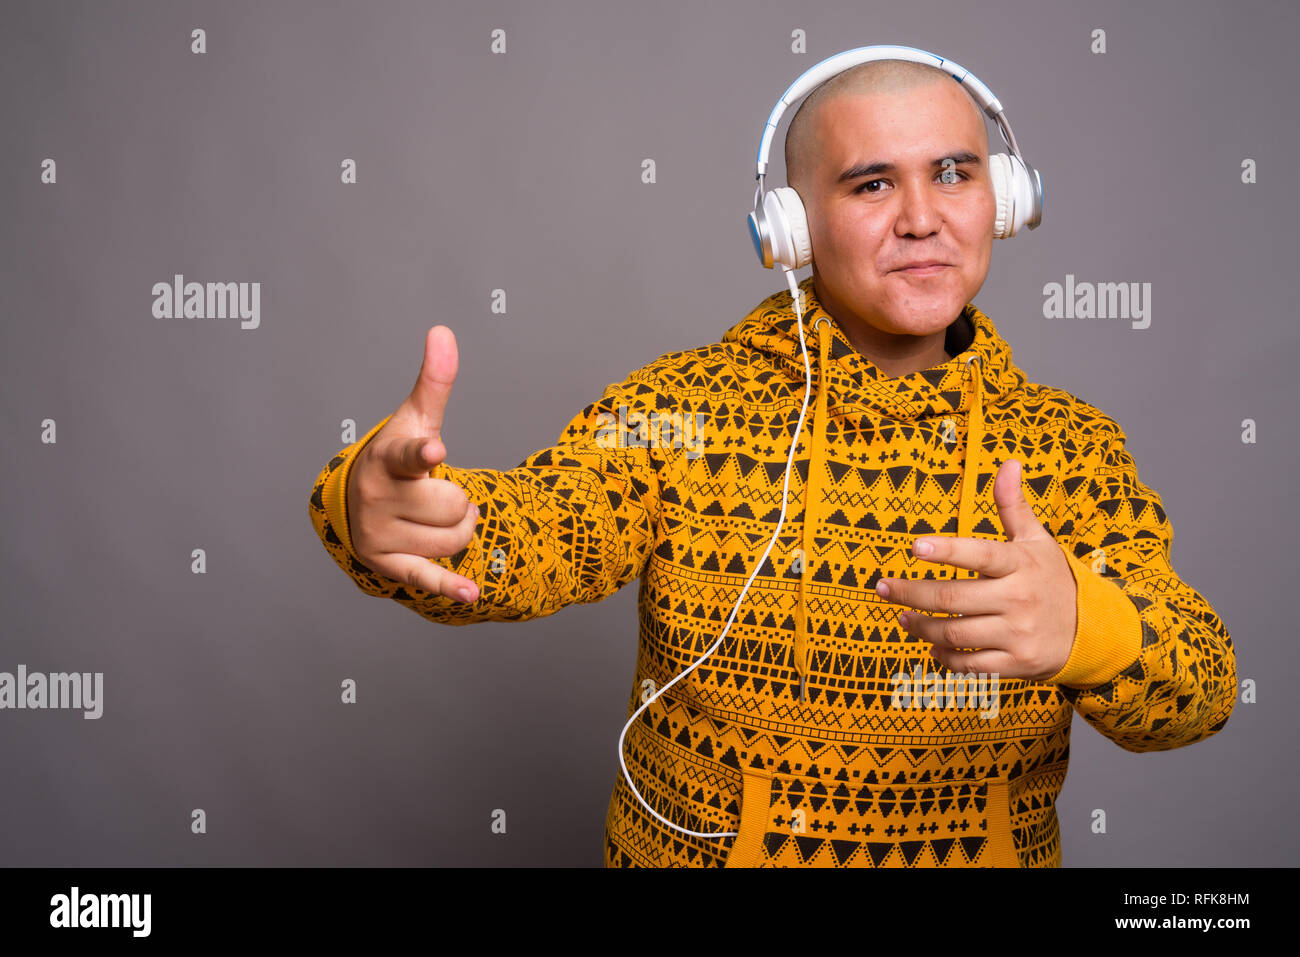 Young bald Asian man listening to music against gray background Stock Photo